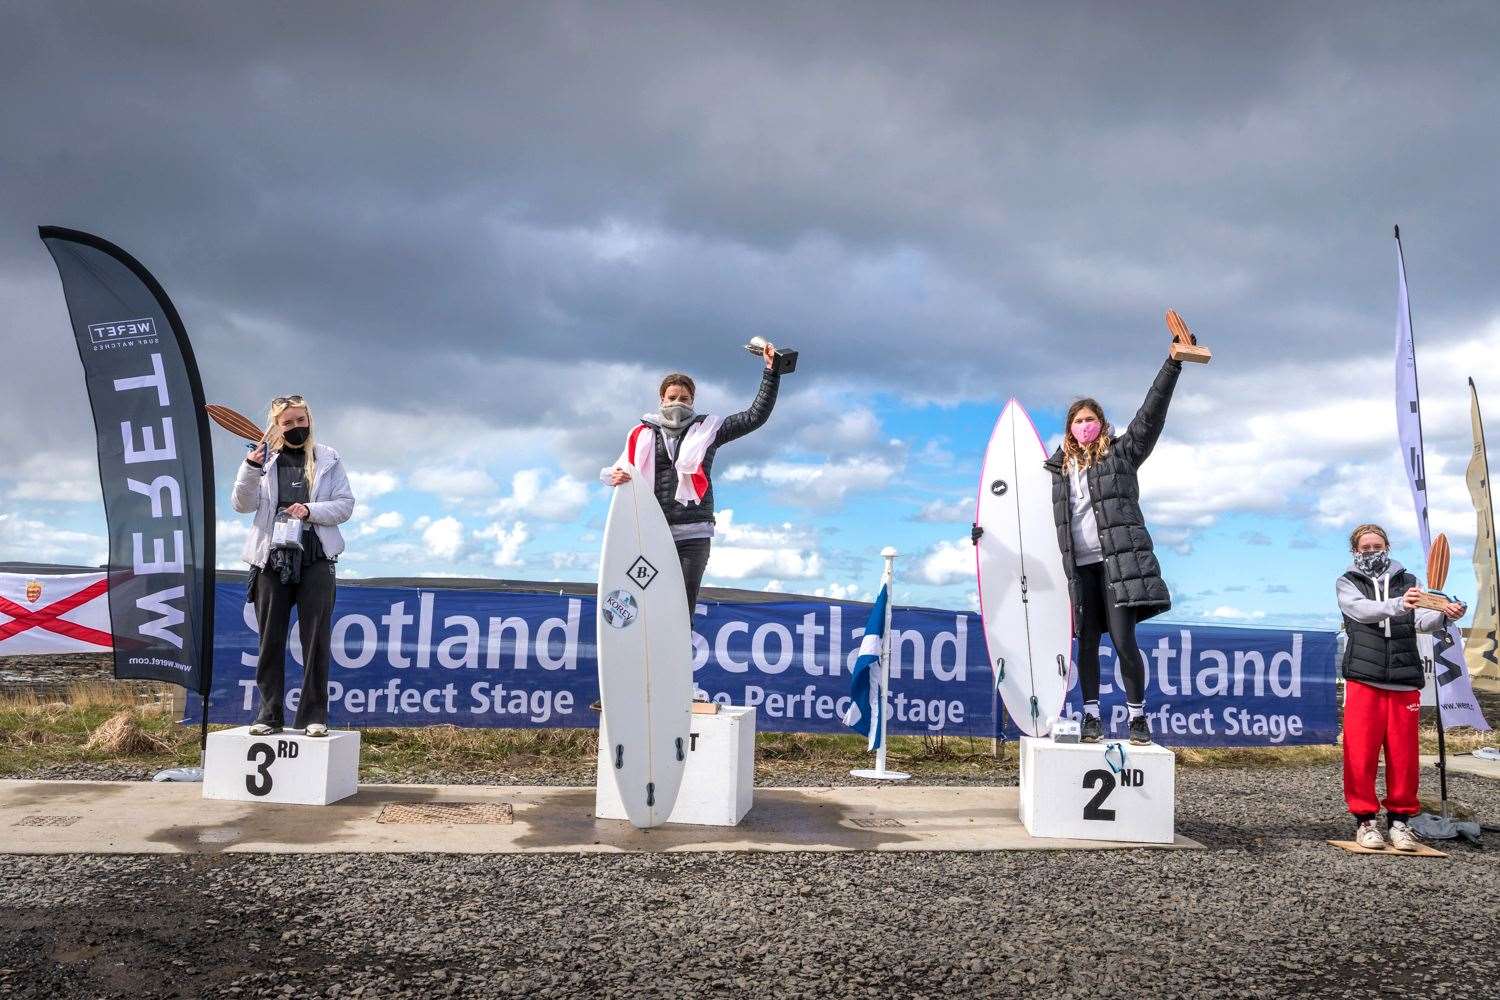 The champions from the women's division, all from the English team, take to the podium – first Lucy Campbell, second Emily Currie, third Ellie Turner, and fourth Alys Barton. Picture: Studiograff Photography